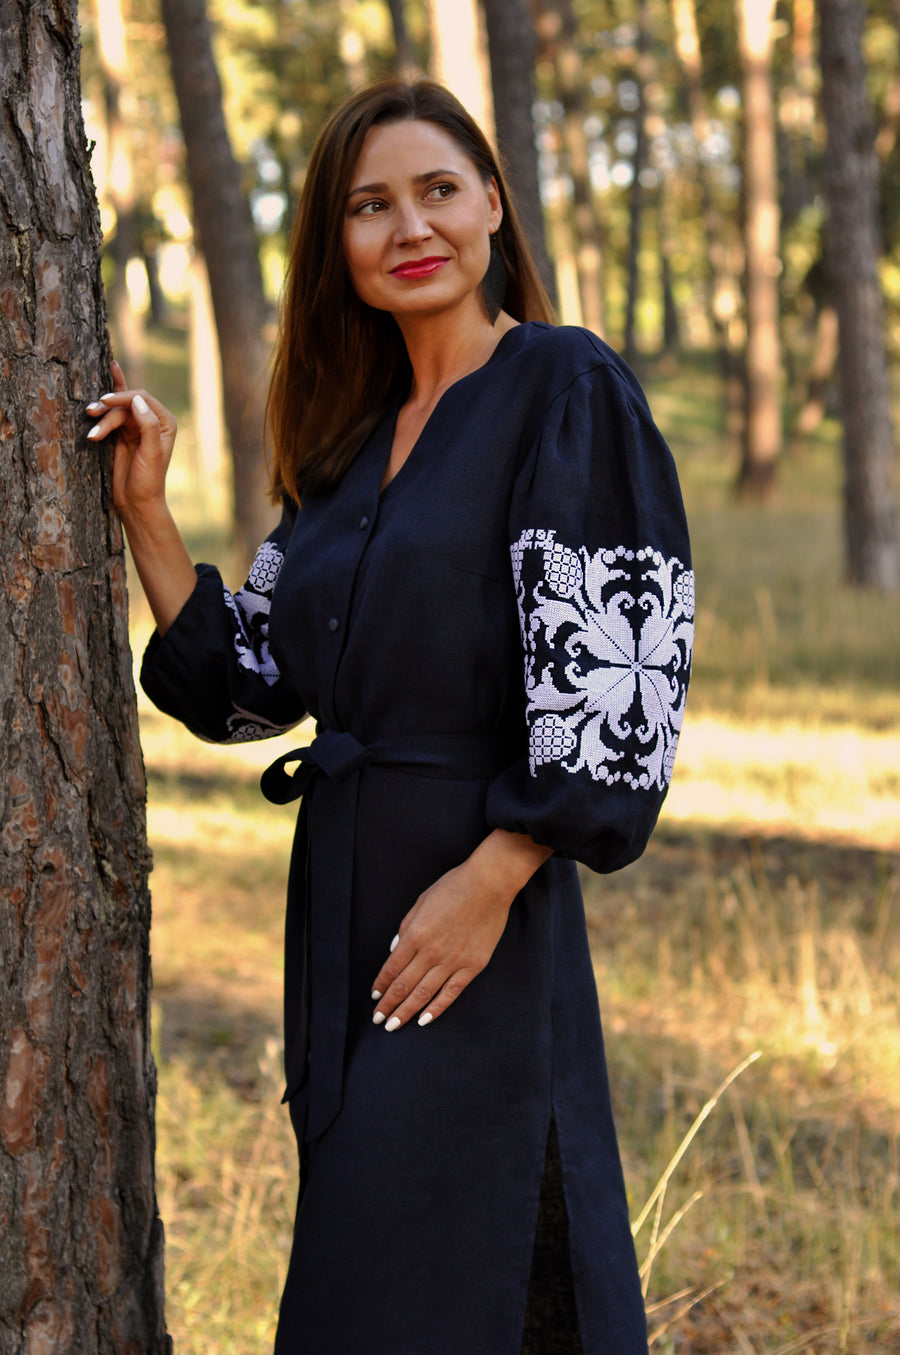 Robe dress made of natural linen with contrasting embroidery